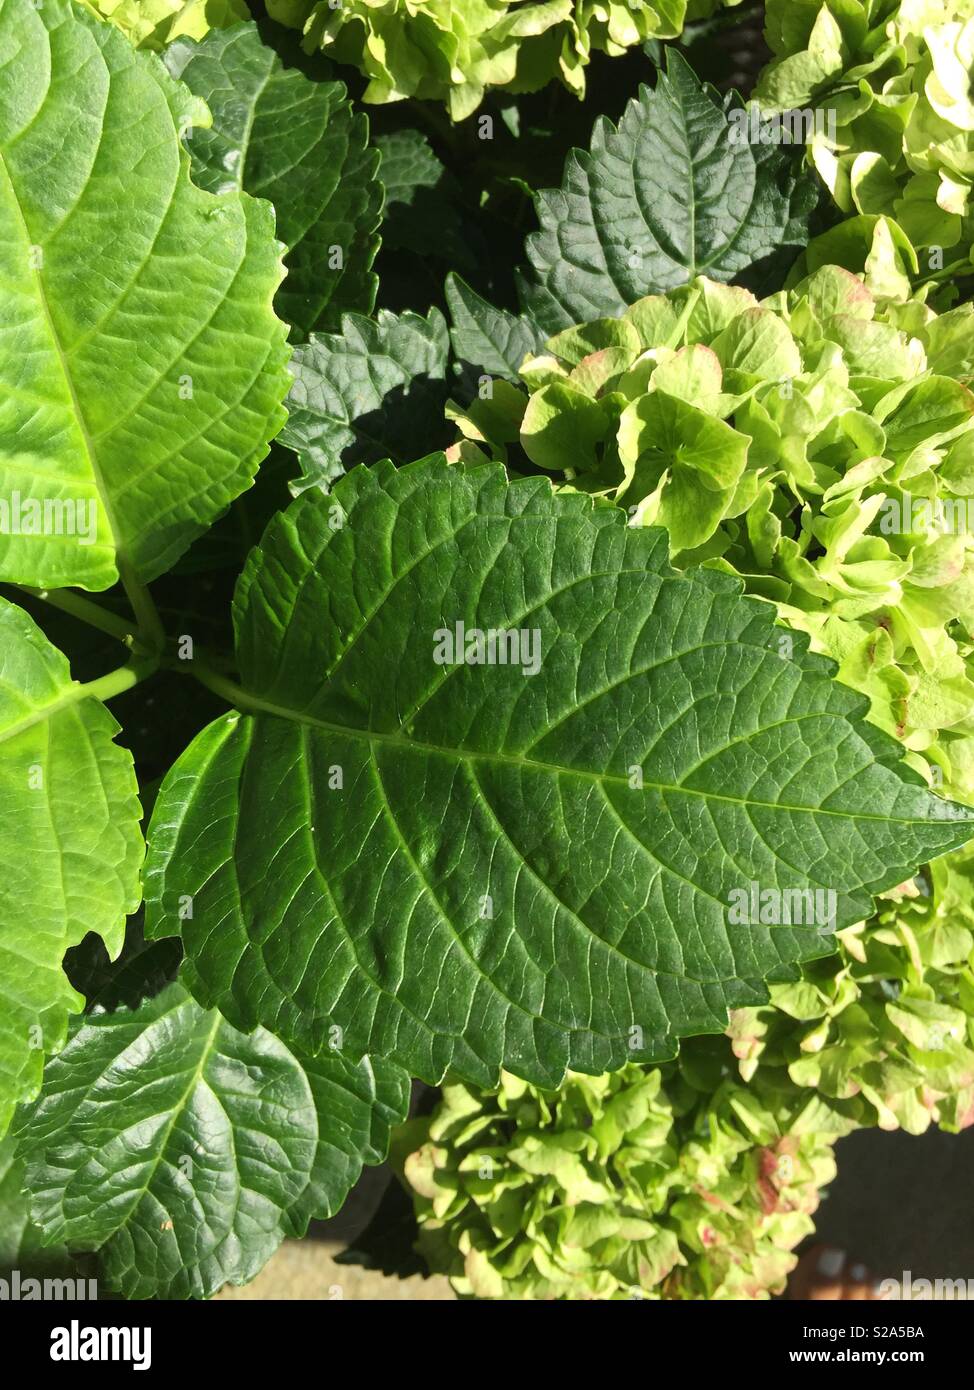 Hydrangea leaves with green flowers nature horticulture Stock Photo